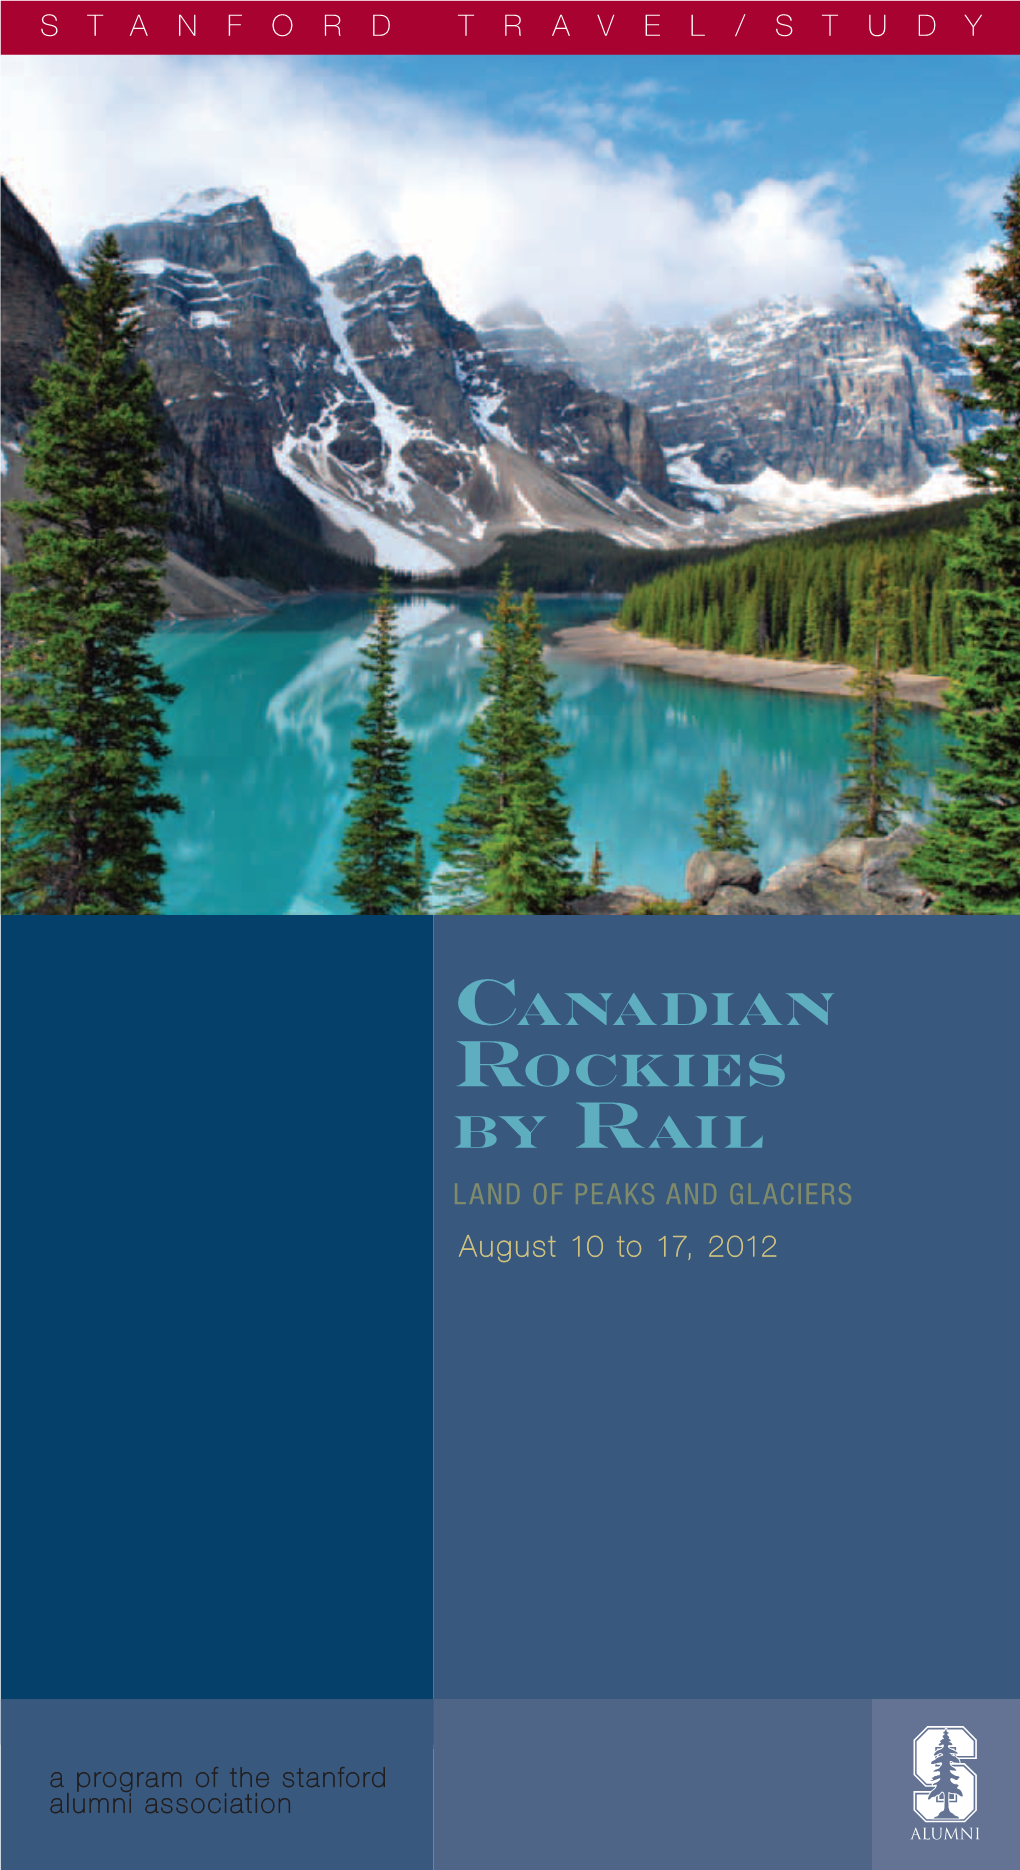 Canadian Rockies by Rail Land of Peaks and Glaciers August 10 to 17, 2012